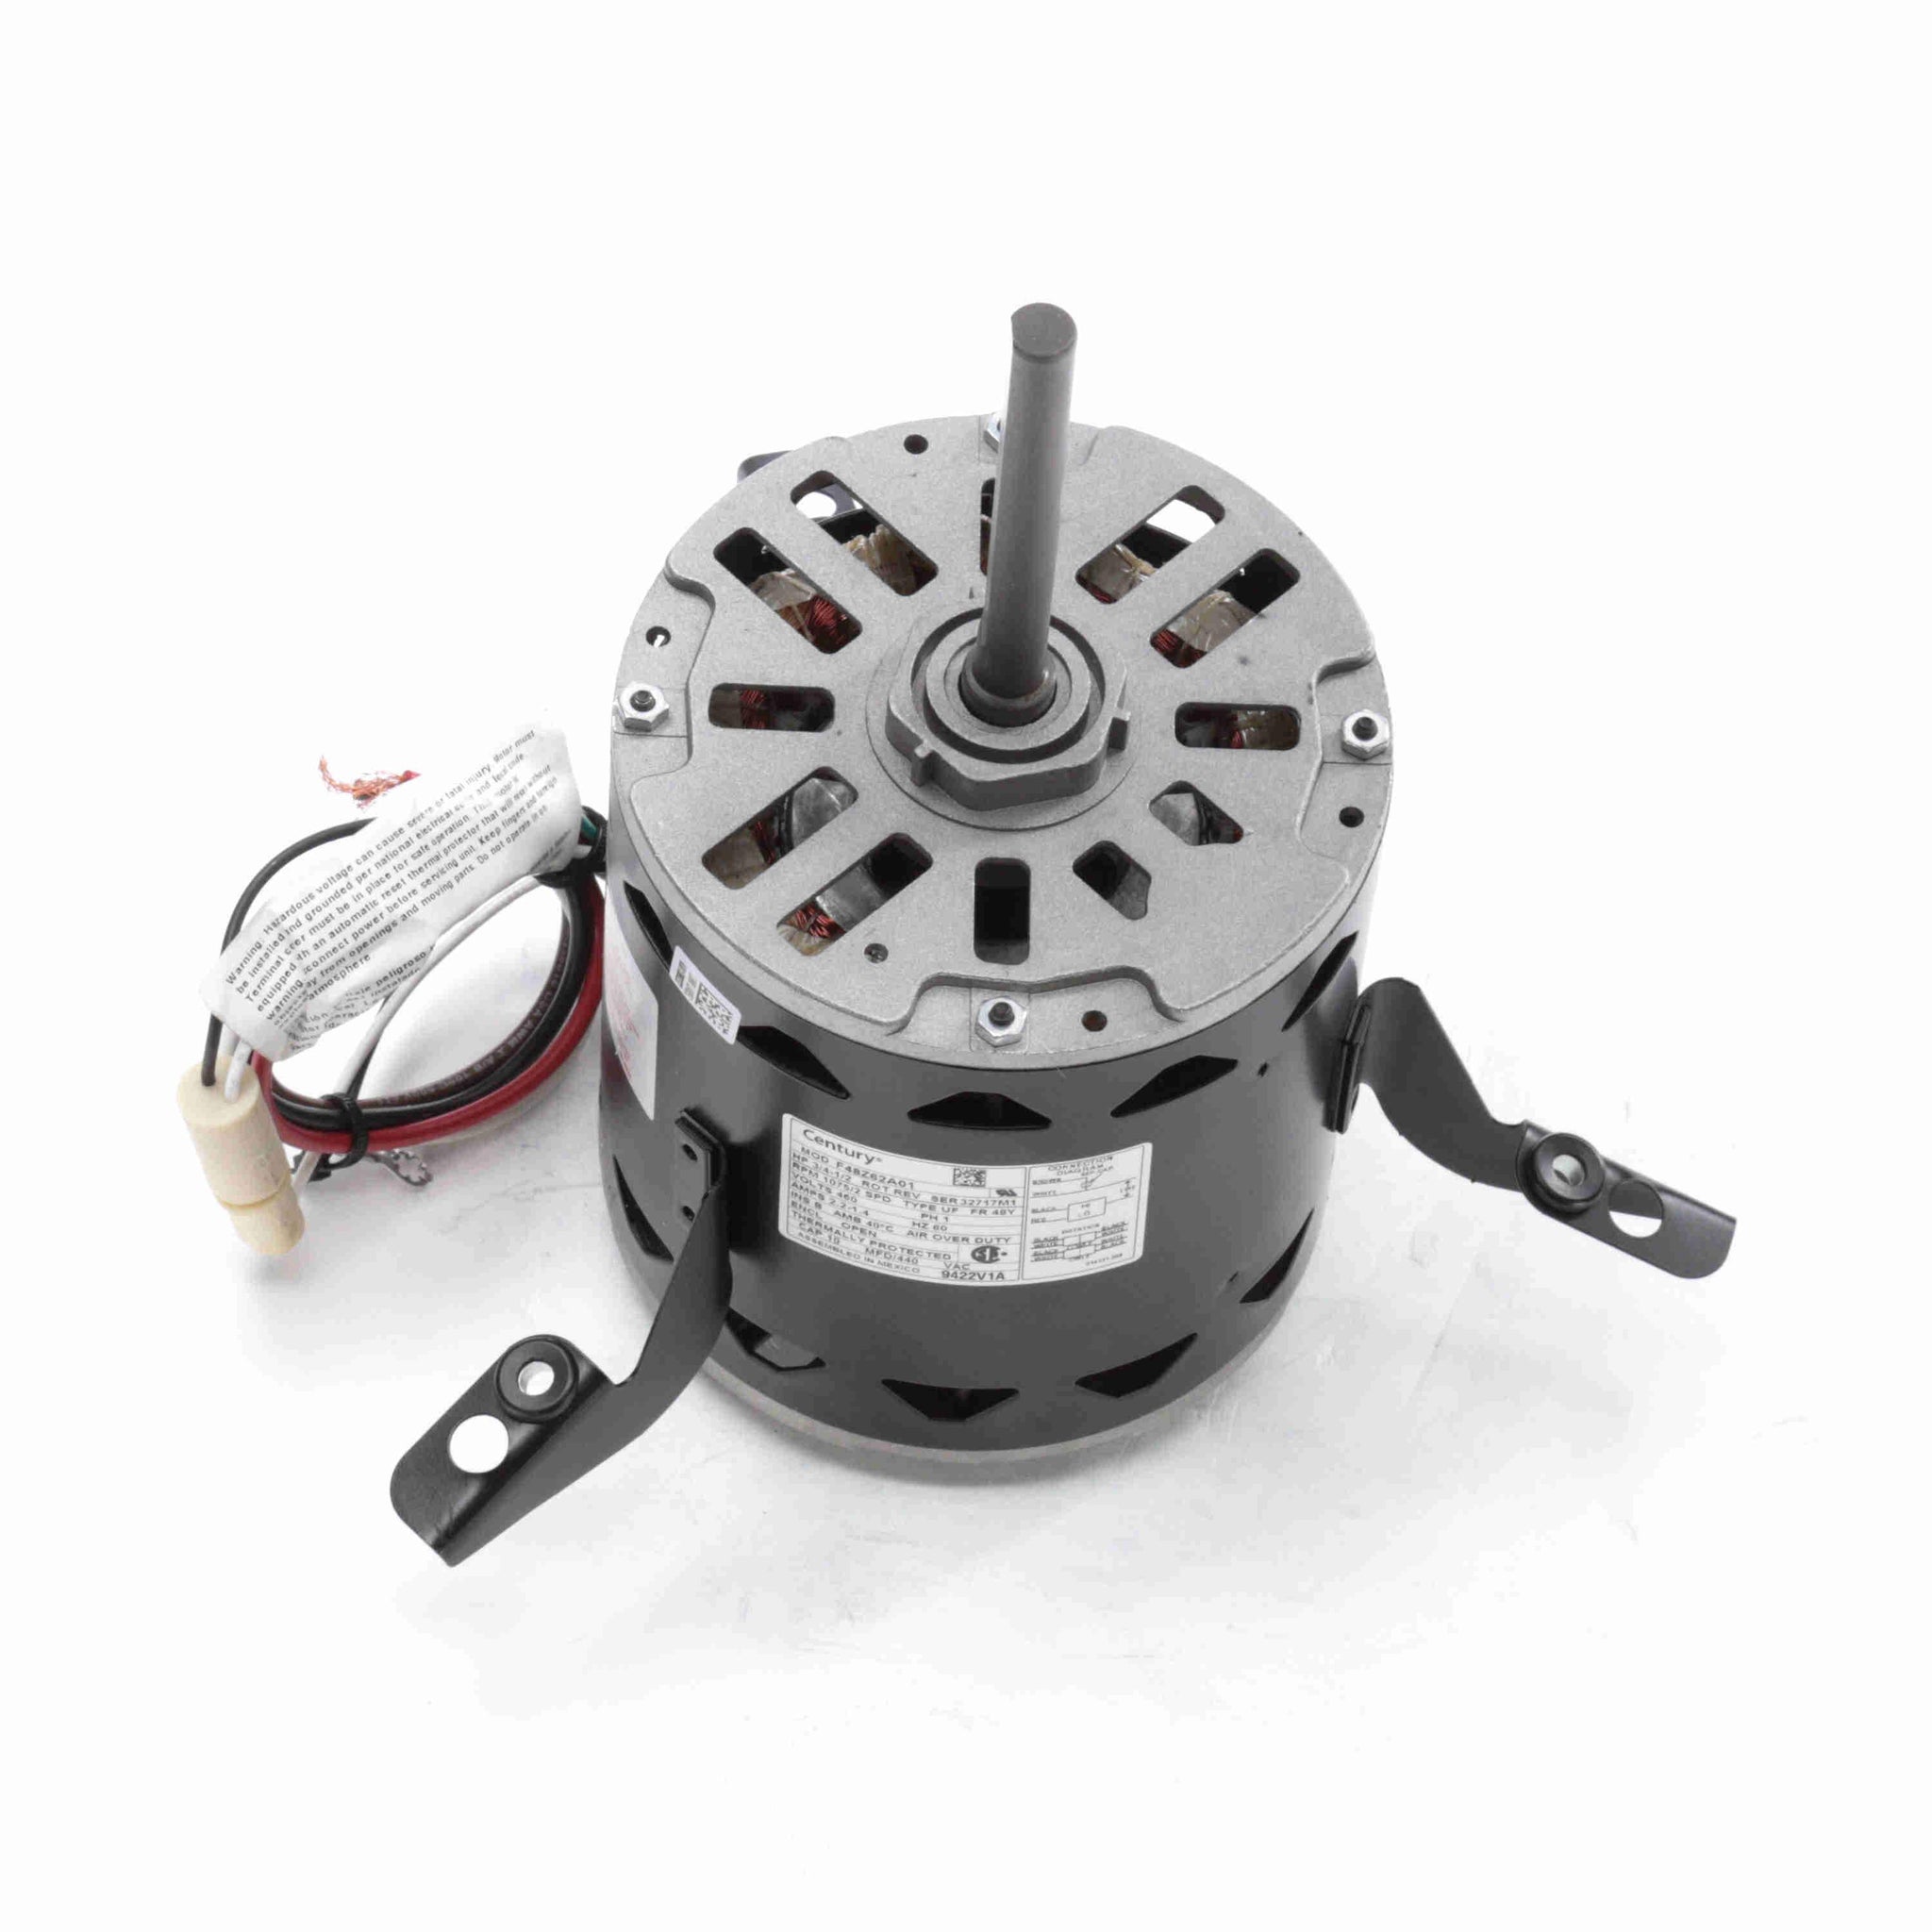 9422V1A -  3/4 -1/2 HP Fan Coil / Room Air Conditioner Motor, 1075 RPM, 2 Speed, 460 Volts, 48 Frame, OAO - Hardware & Moreee